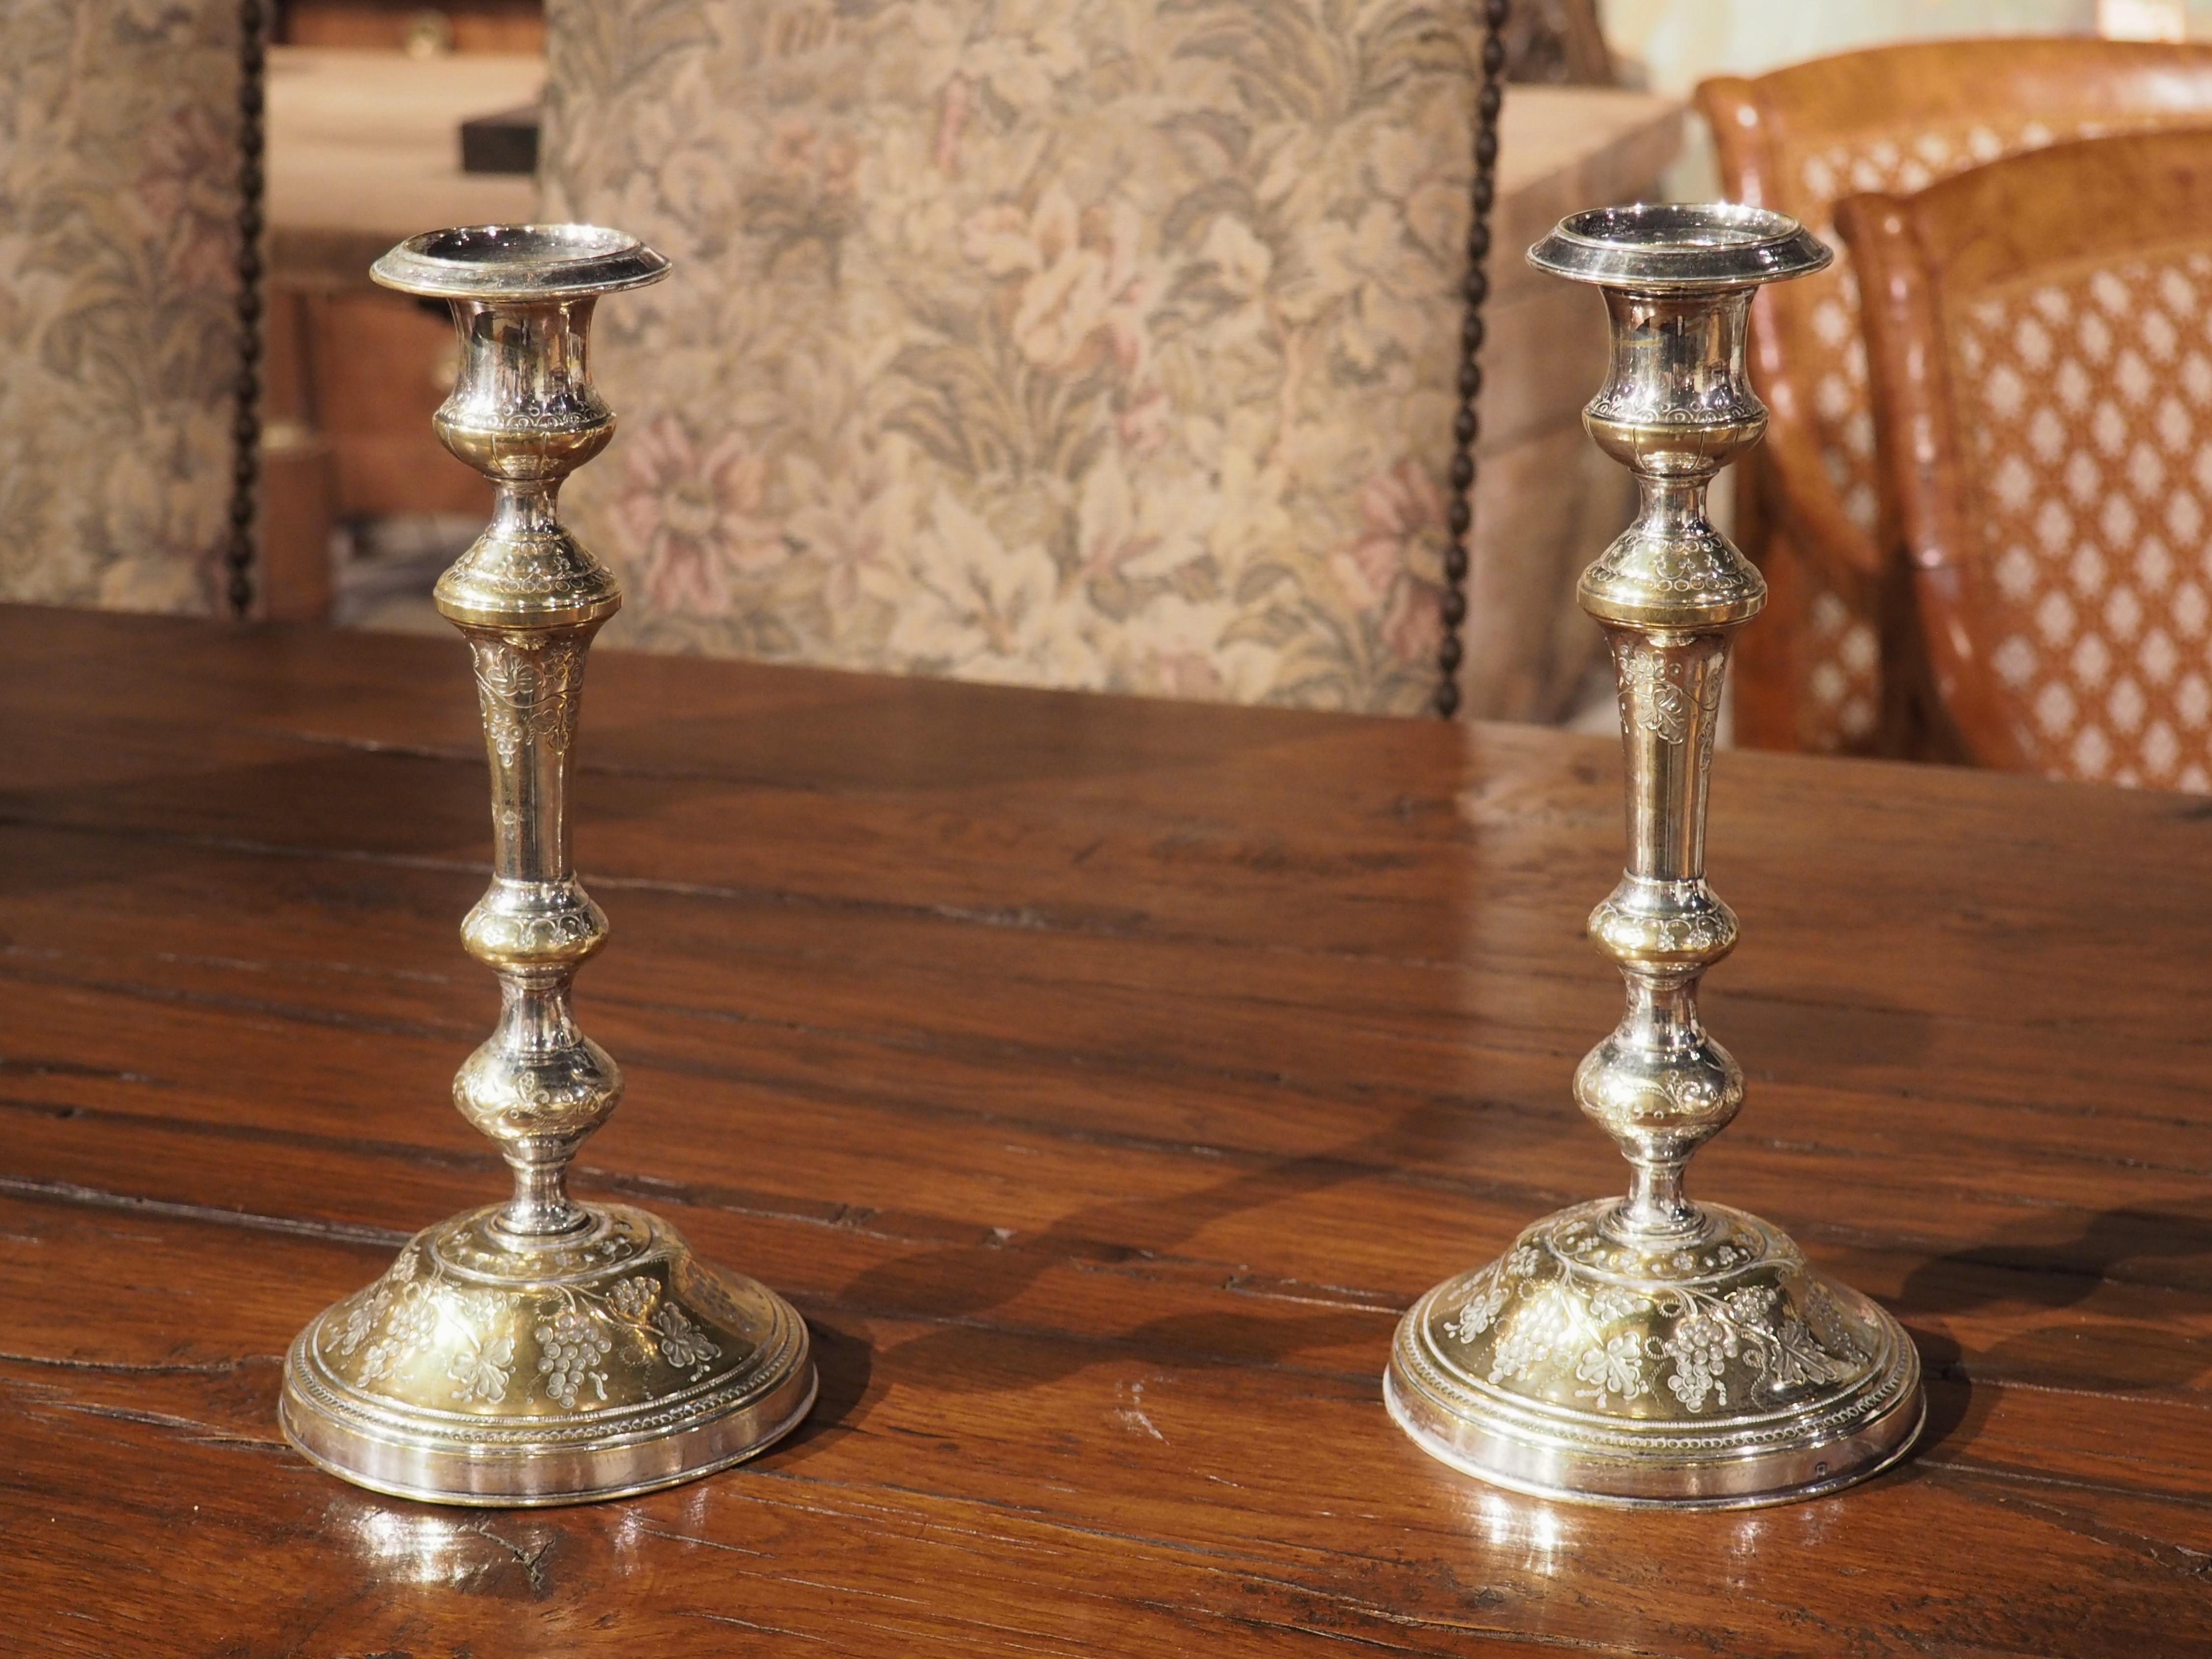 Cast in France during the 1700s, this pair of silvered bronze candlesticks has been delicately chased with grape cluster designs. The highly sinuous candlesticks feature several knops, all adorned with a variety of grape motifs. Additional elements